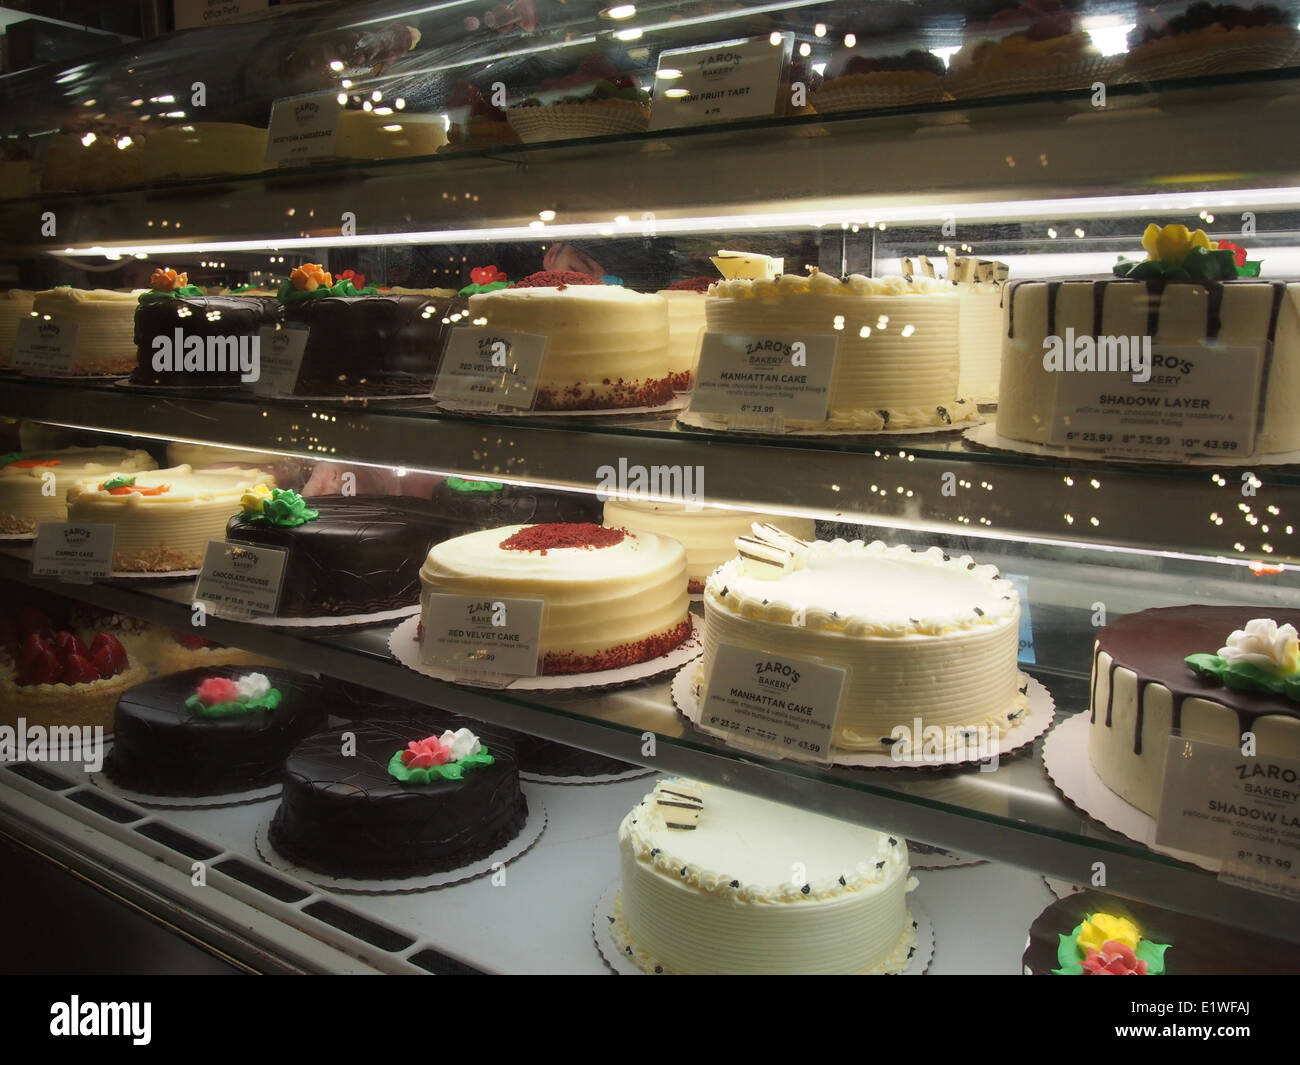 Cakes on display at Zaro's Bakery in Grand Central Station, New York, USA, May 30, 2014, © Katharine Andriotis Stock Photo